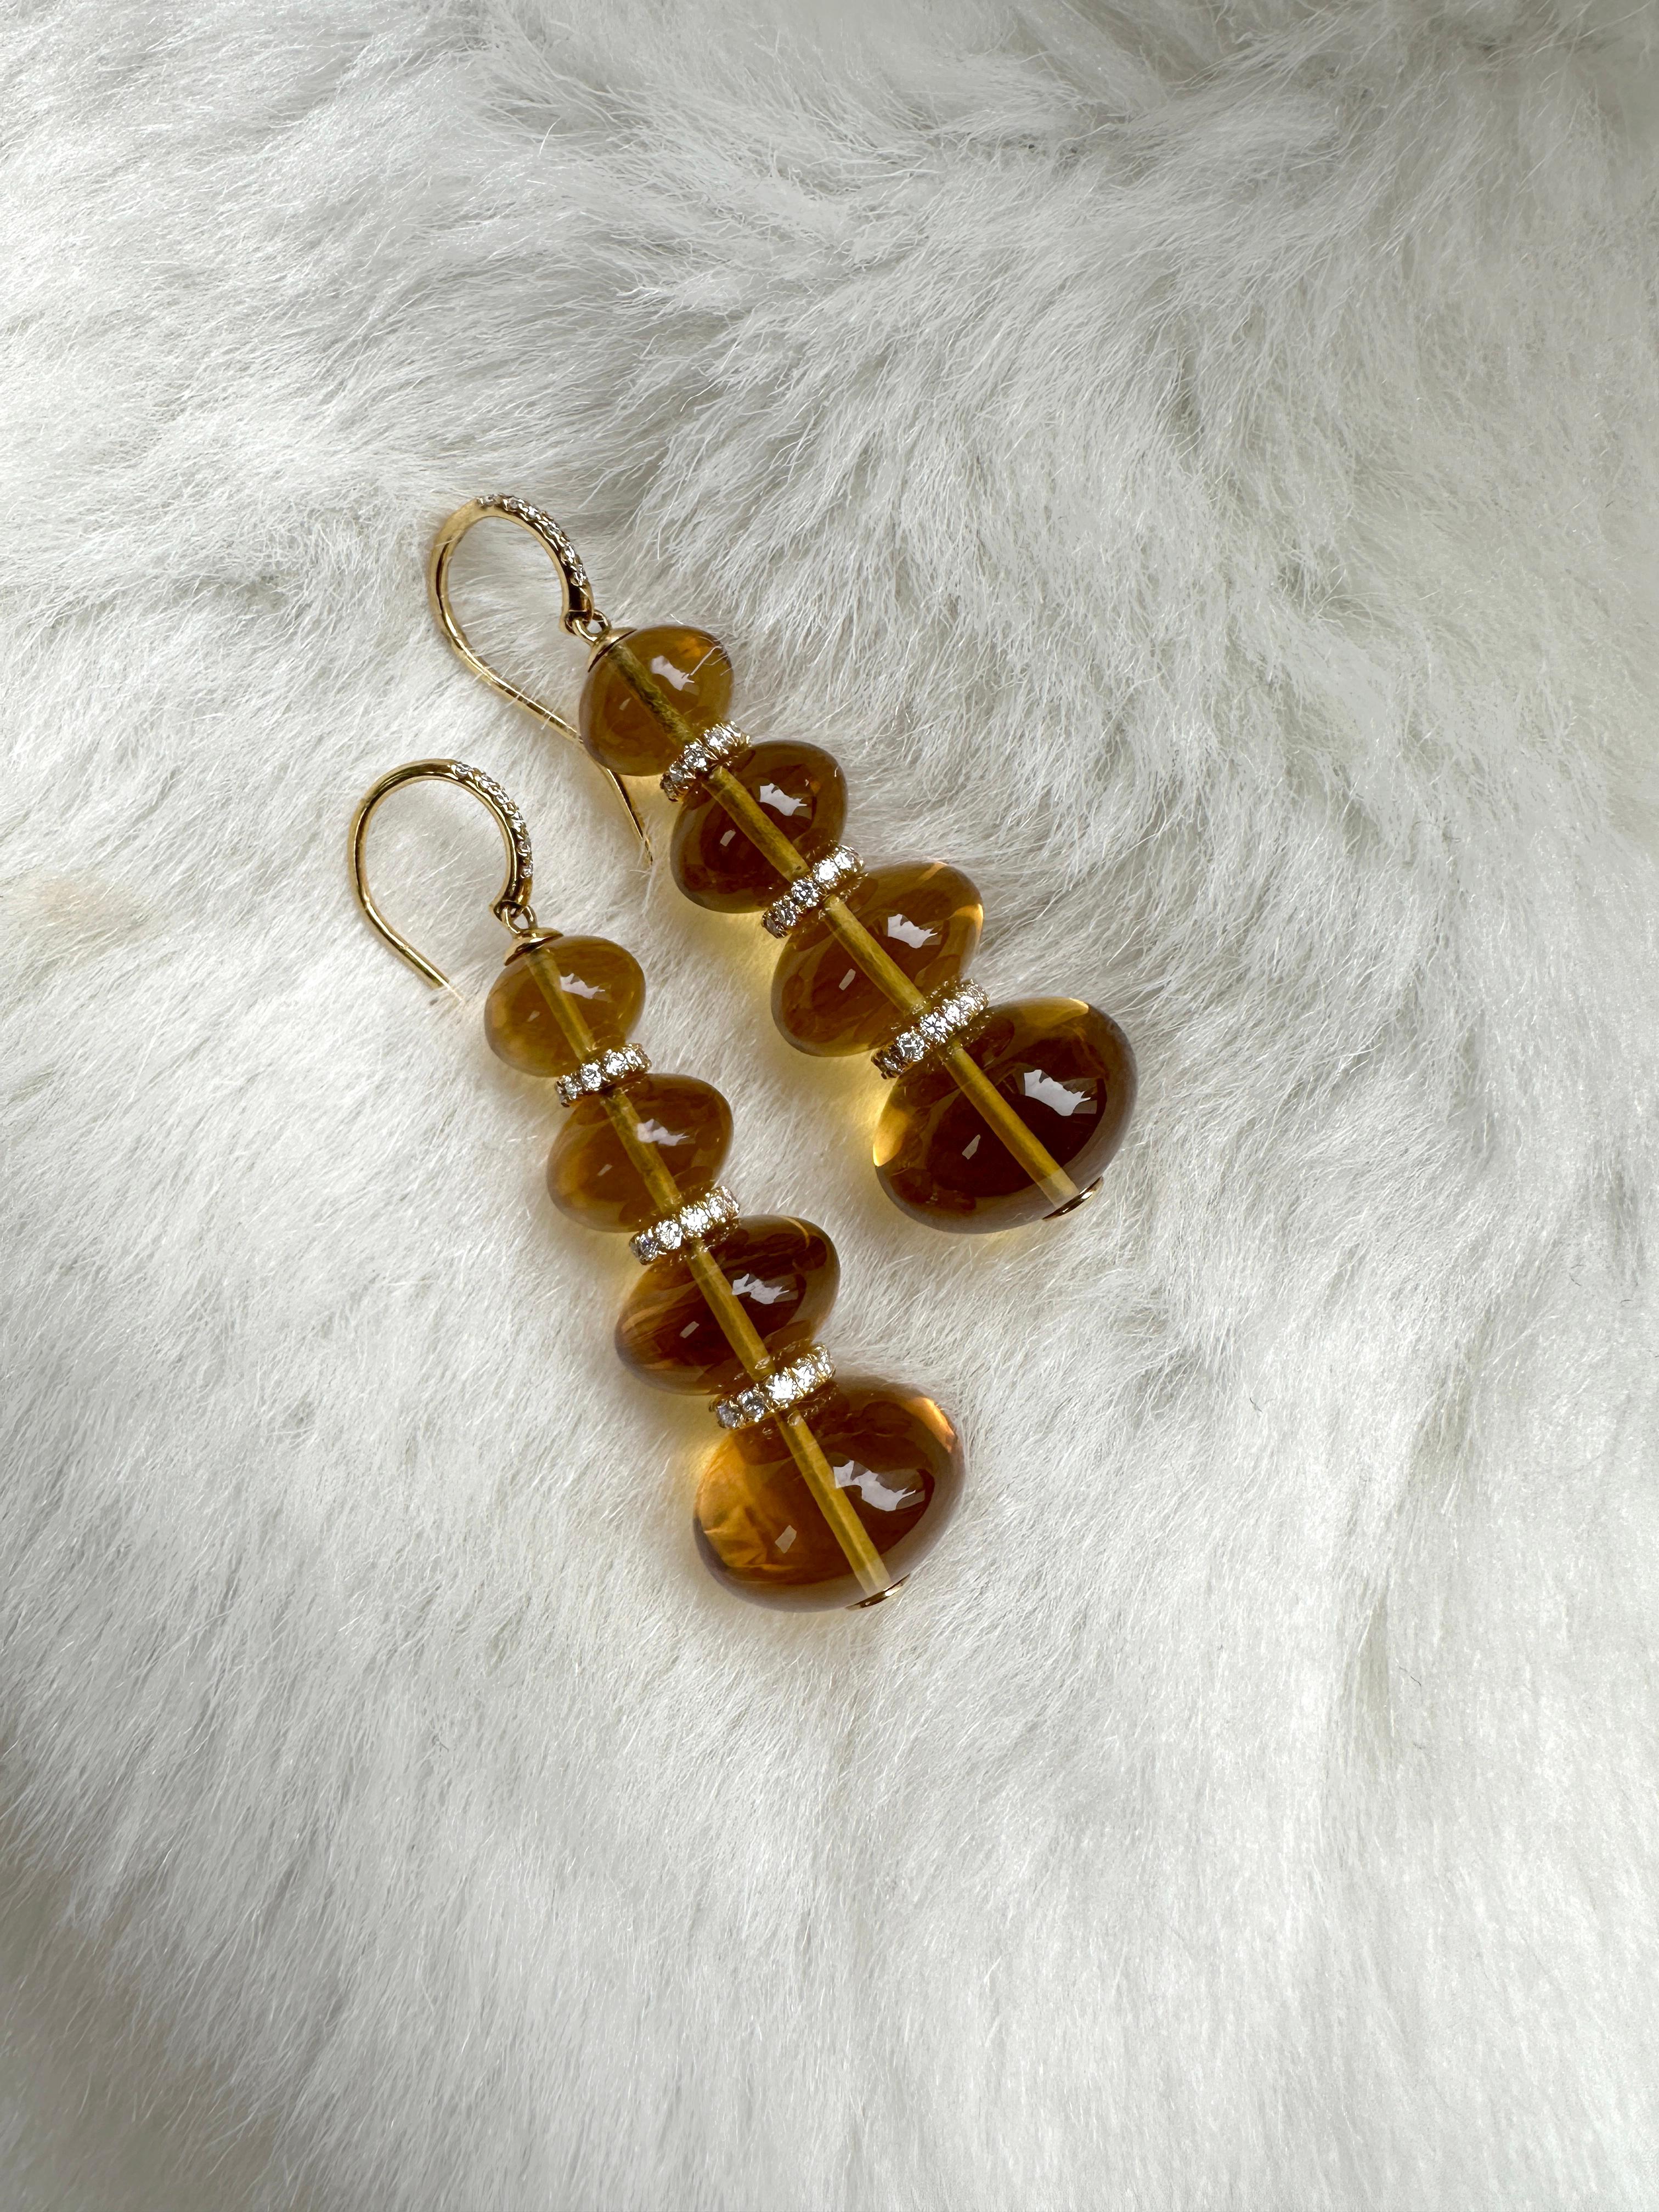 Contemporary 4 Tier Citrine Bead with Diamonds Earrings For Sale